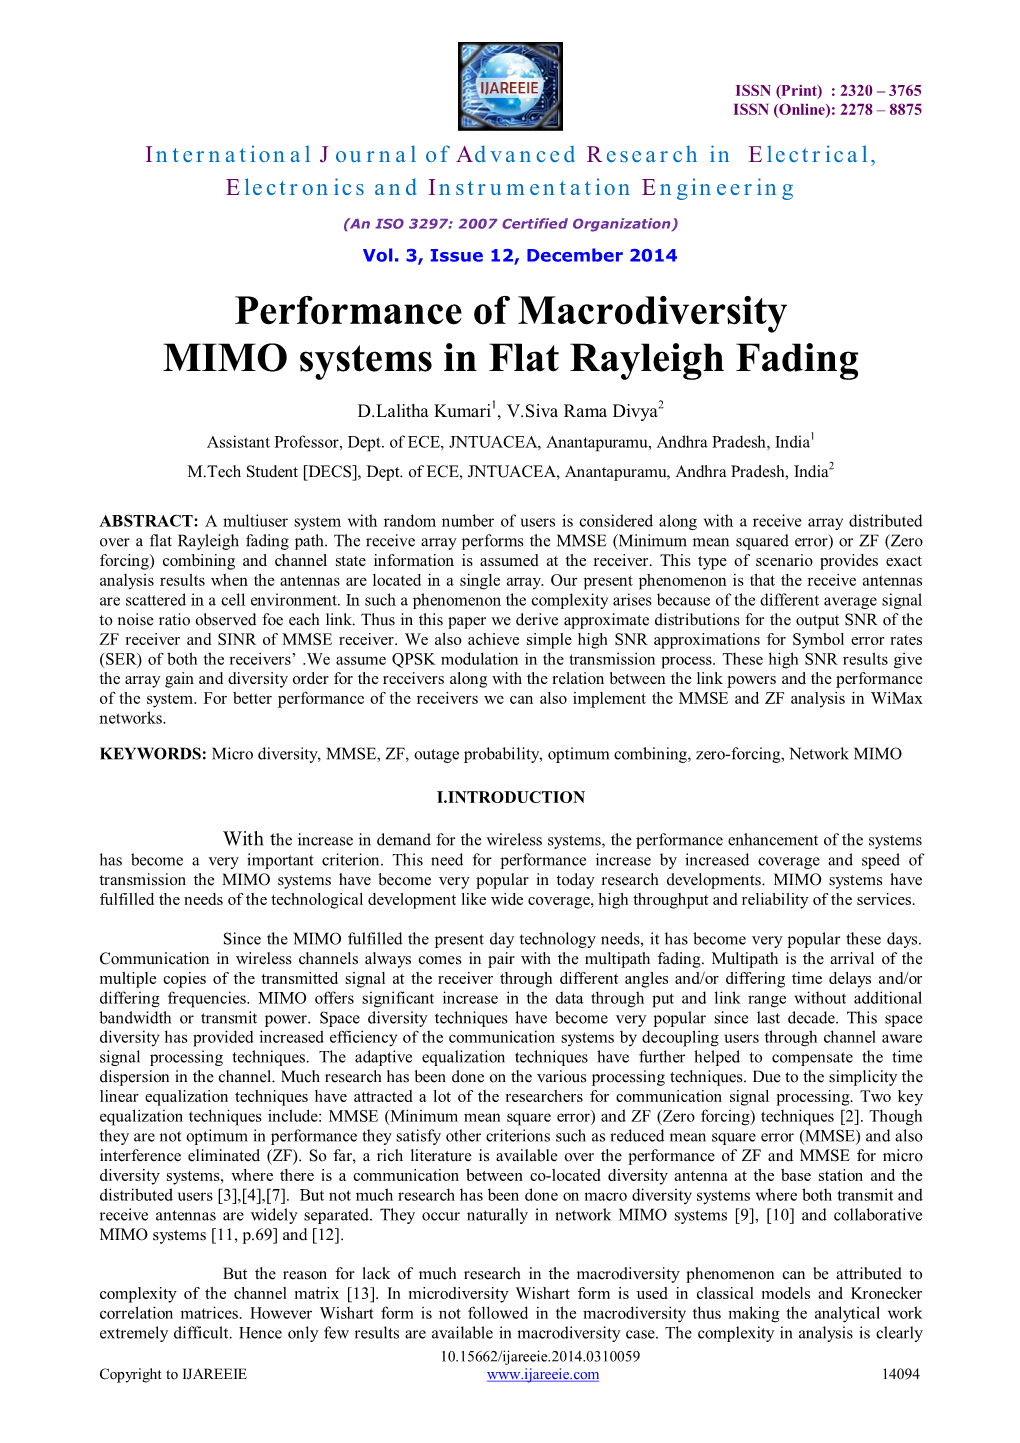 Performance of Macrodiversity MIMO Systems in Flat Rayleigh Fading